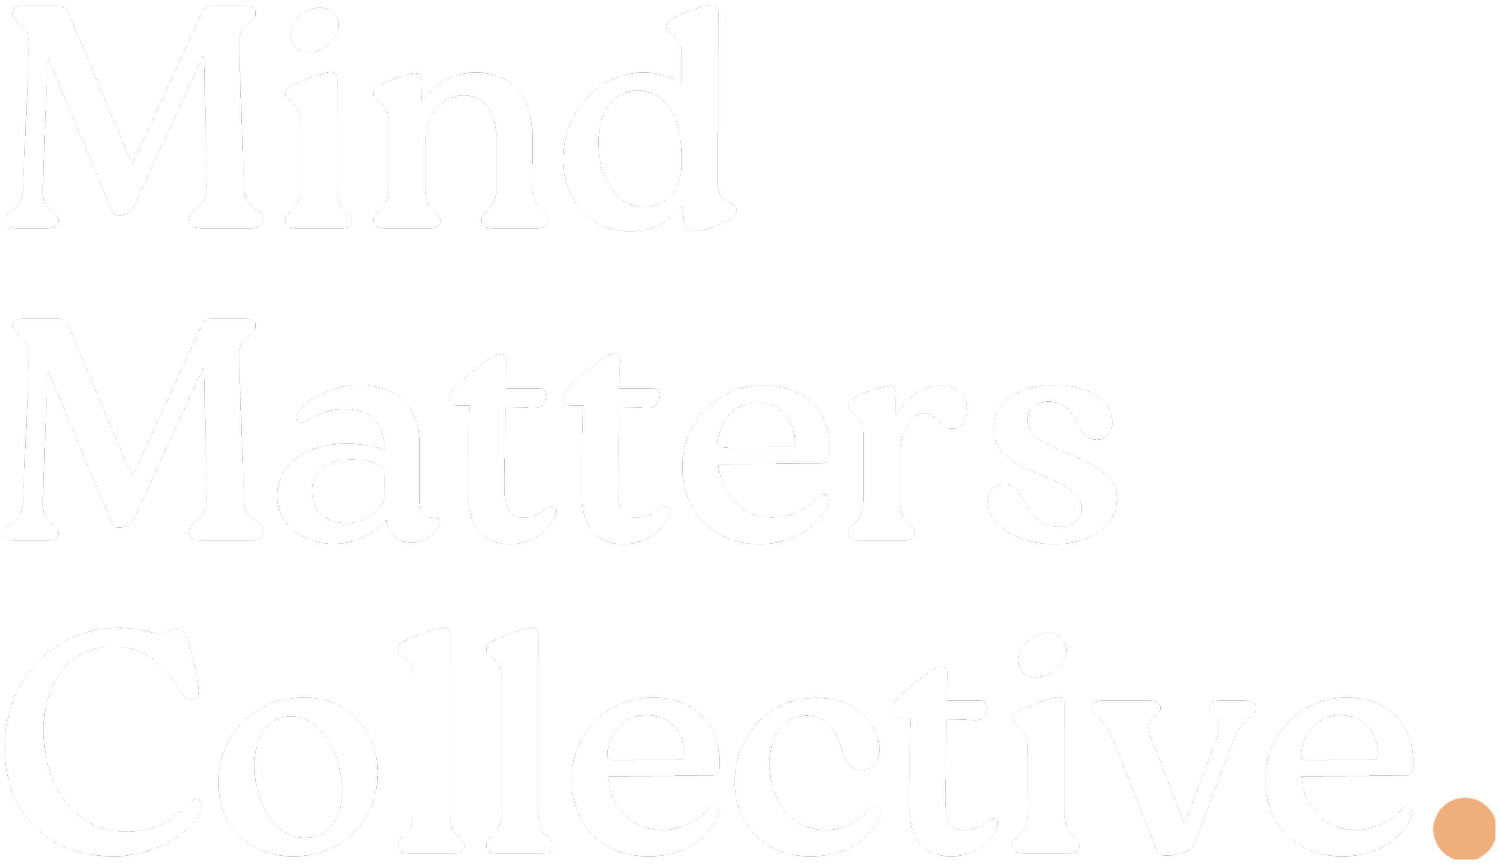 MIND MATTERS COLLECTIVE